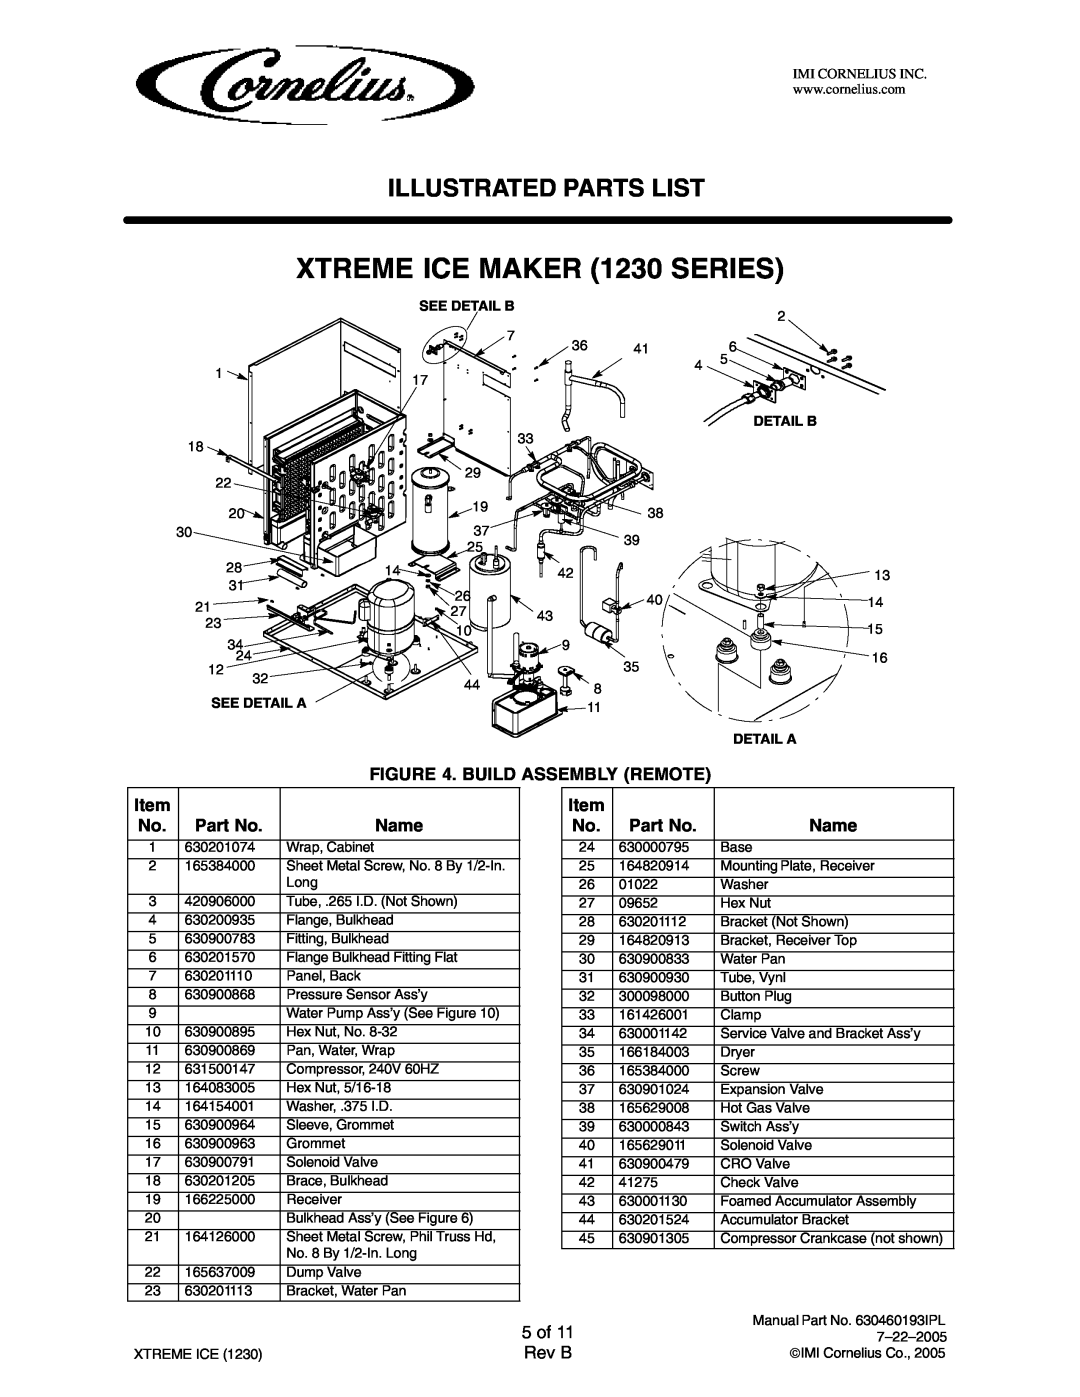 Cornelius 631812002, 631812040, 631812020 5 of, XTREME ICE MAKER 1230 SERIES, Illustrated Parts List, Rev B, See Detail B 